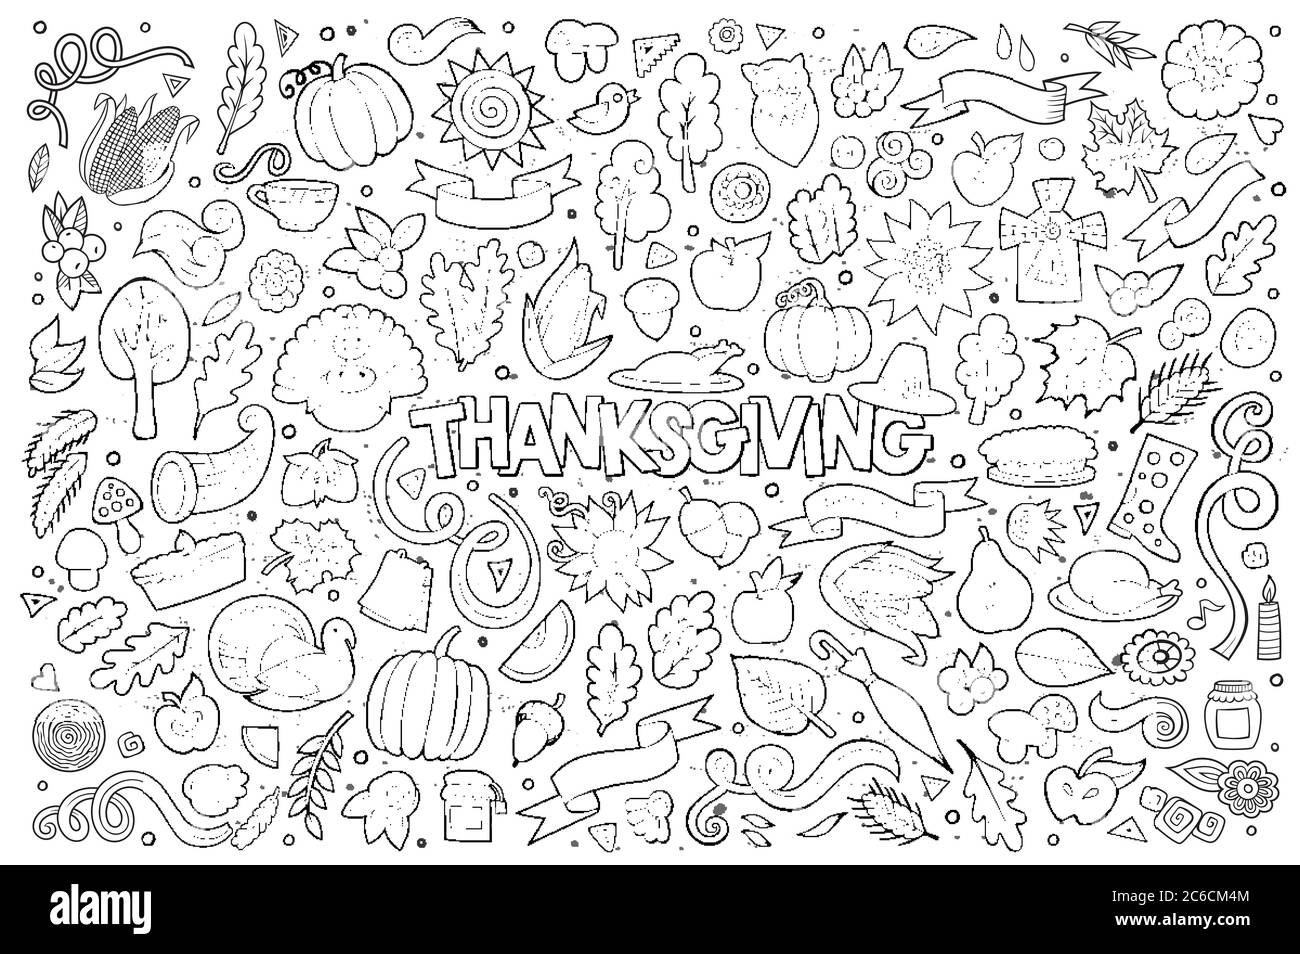 Sketchy vector hand drawn Doodle cartoon set of objects Stock Vector